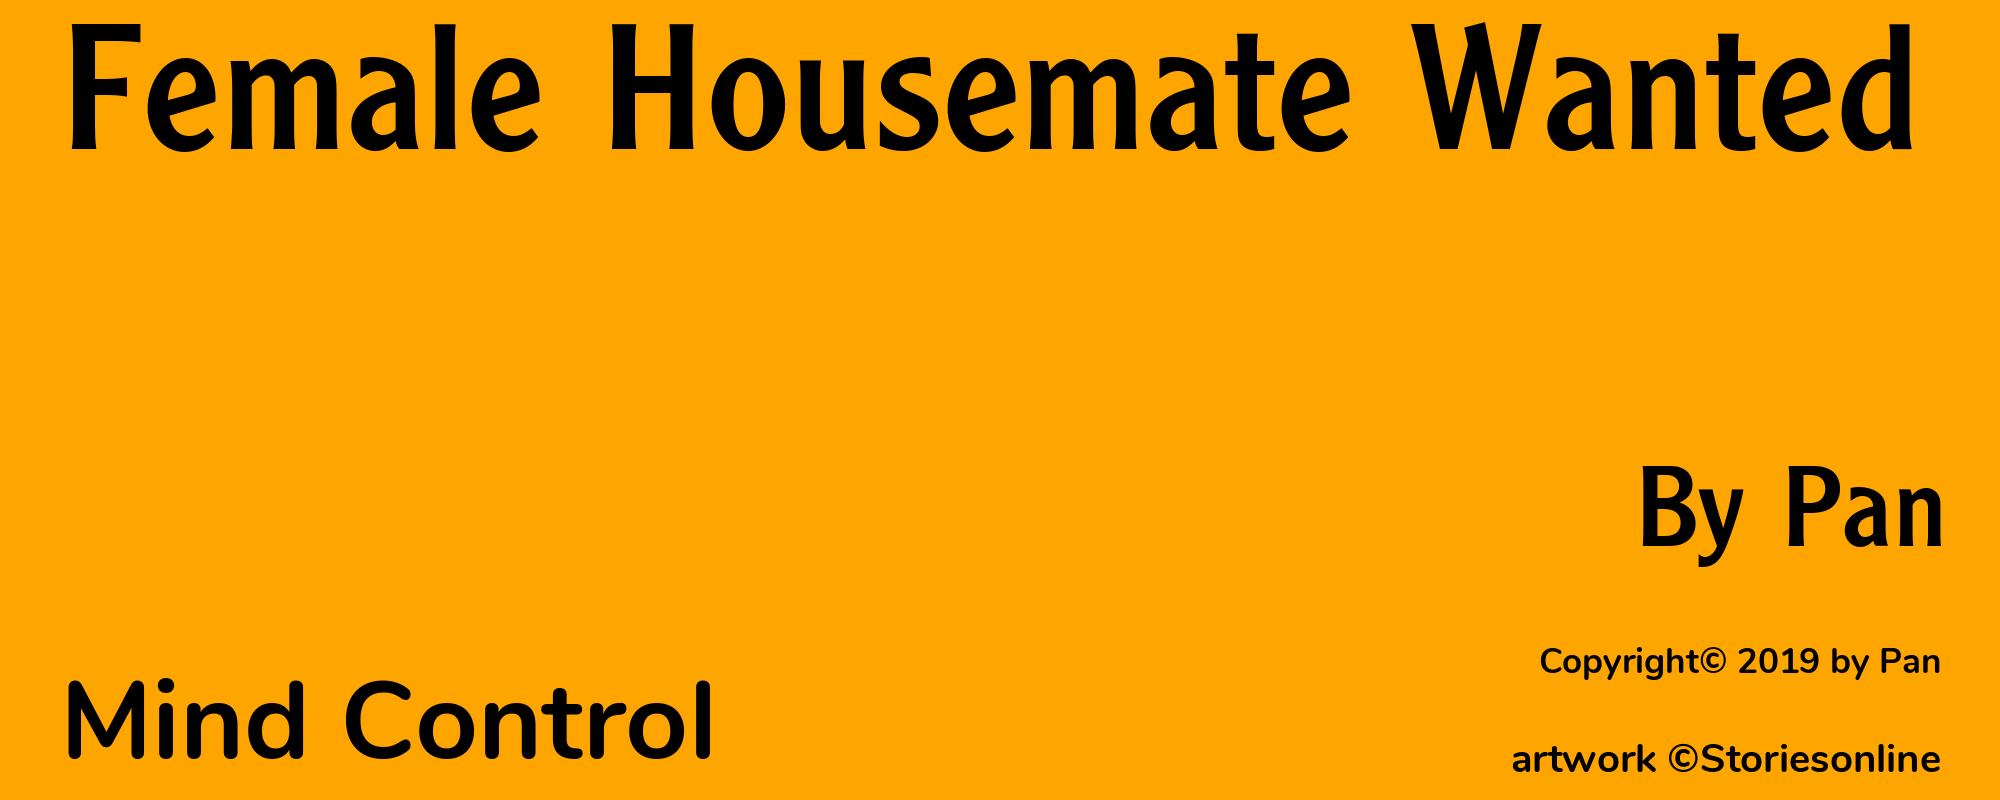 Female Housemate Wanted - Cover